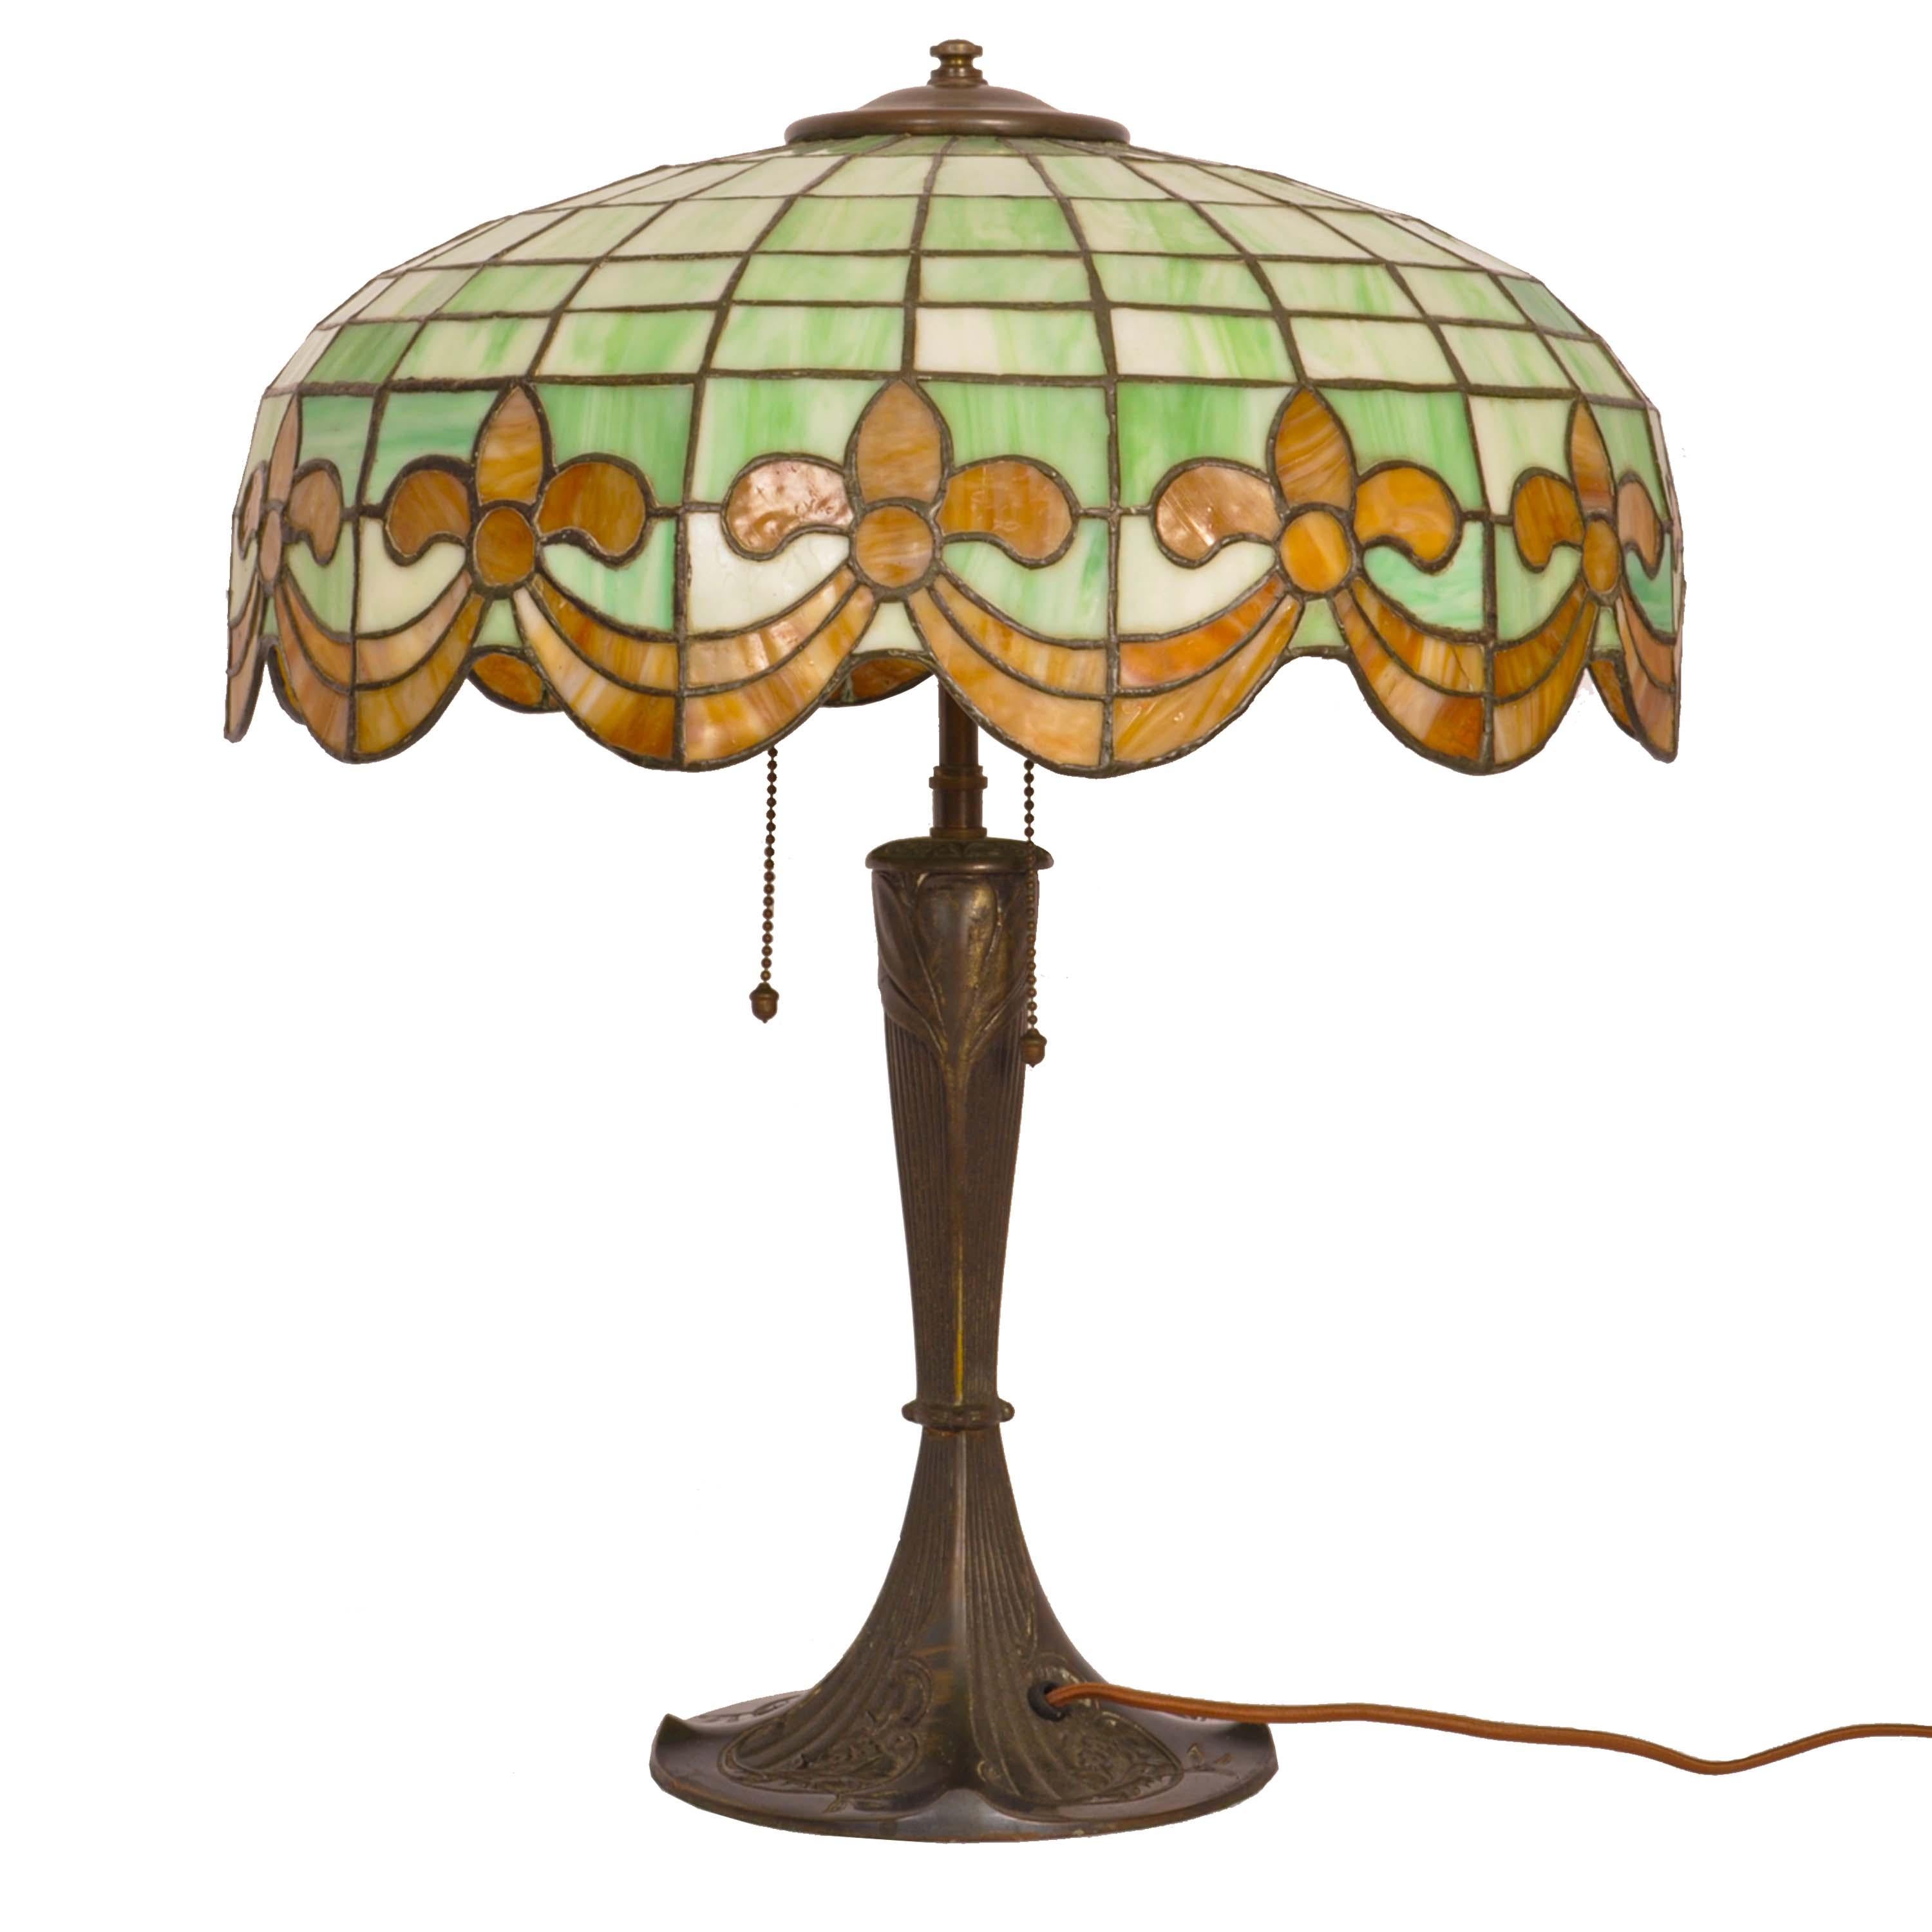 Antique American Art Nouveau Bronze & Leaded Glass Table Lamp by Wilkinson, 1910 In Good Condition For Sale In Portland, OR